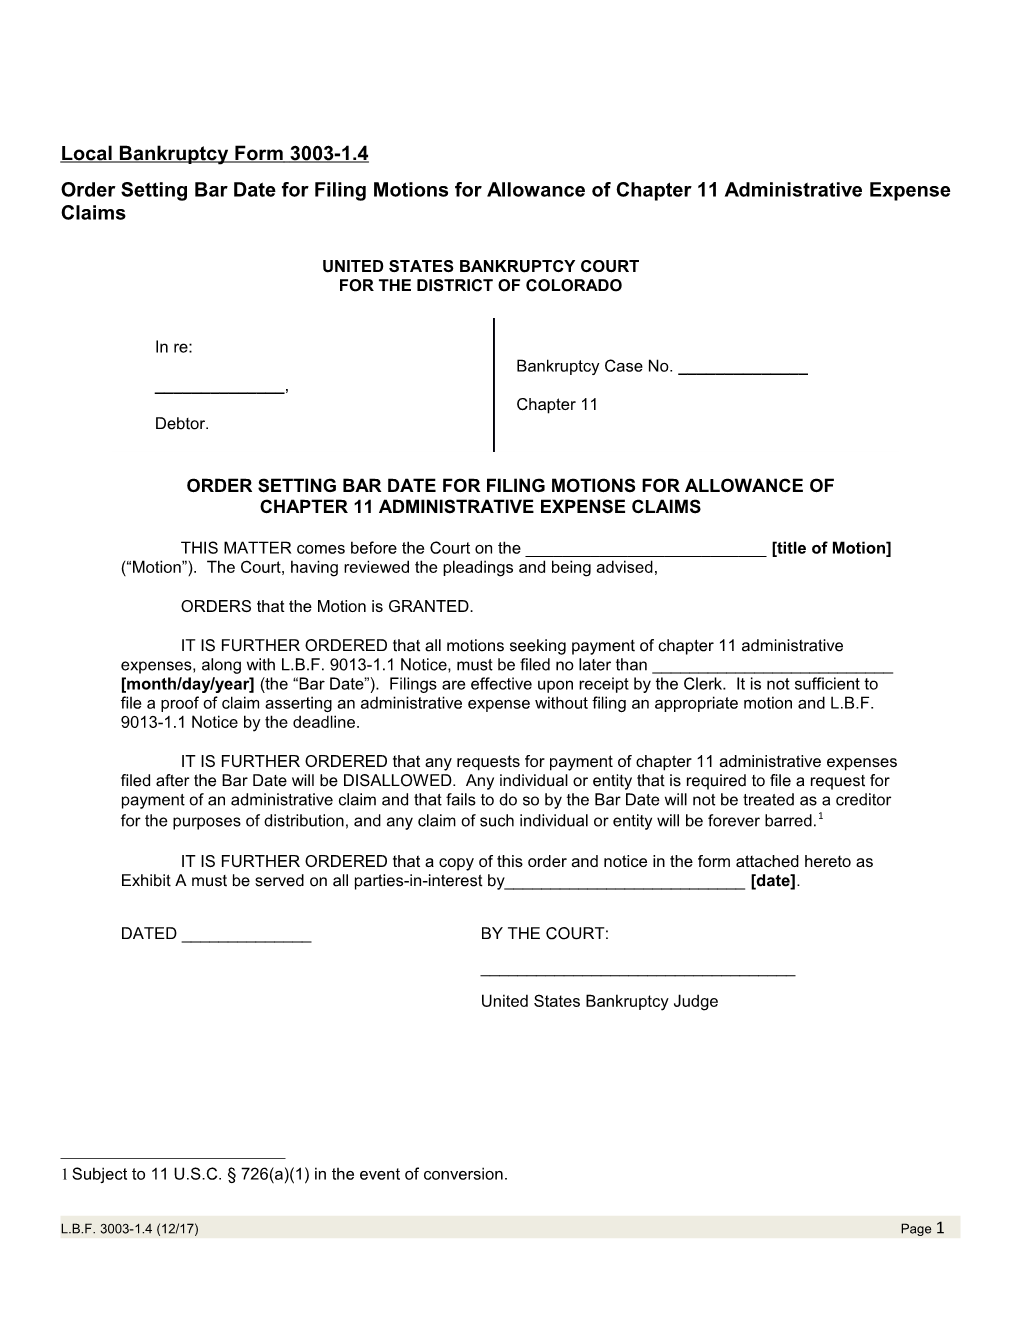 Local Bankruptcy Form3003-1.4